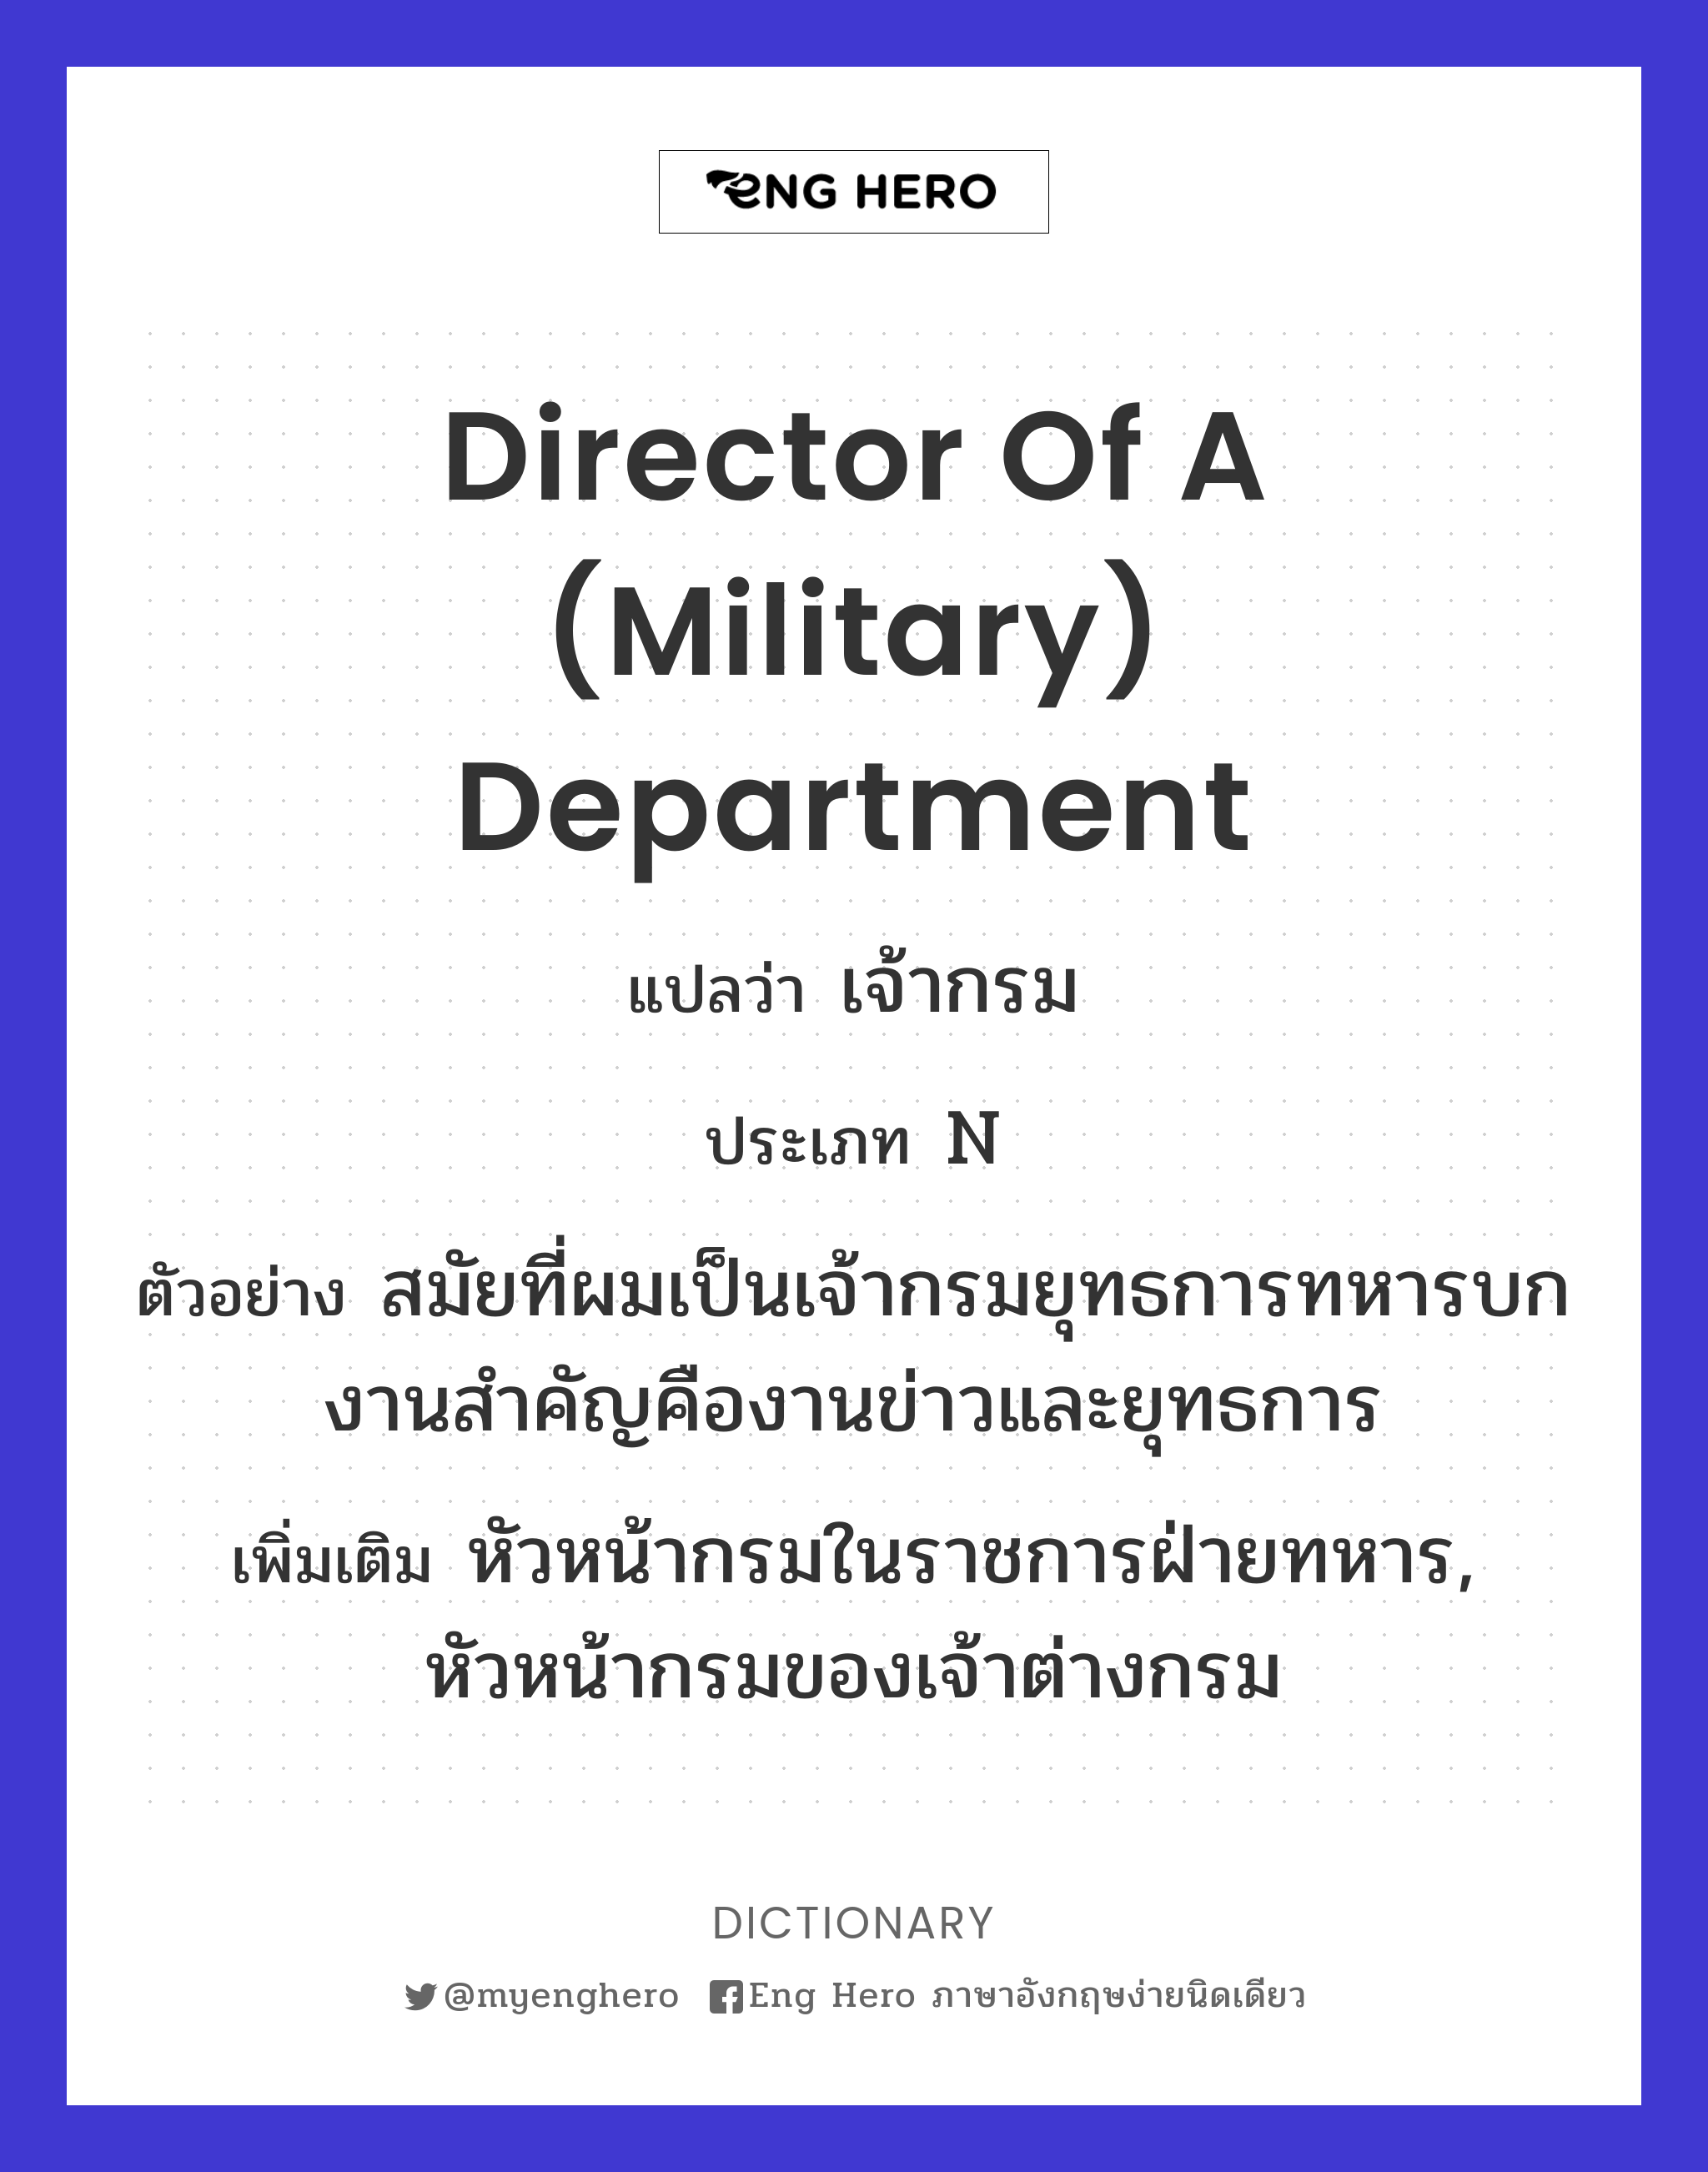 director of a (military) department